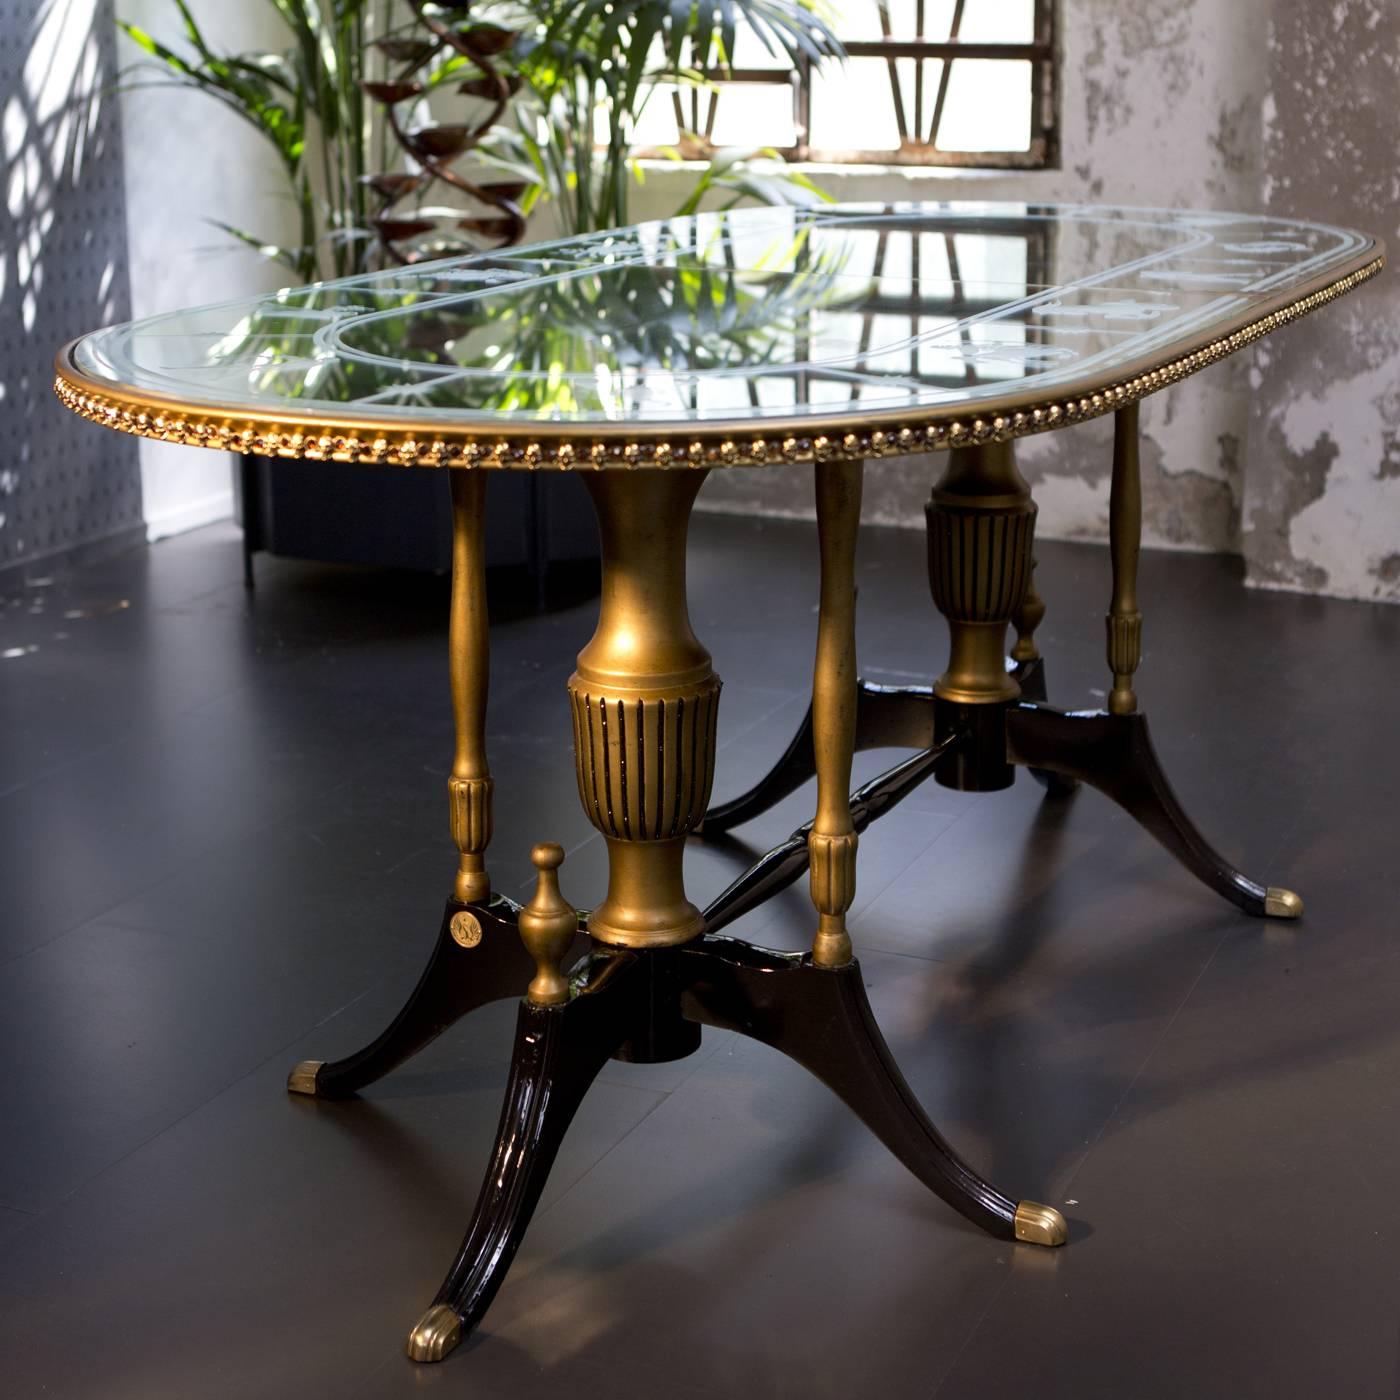 The elliptical top of this elegant table evokes the eternal passing of time, with no beginning and no end. Figurines representing the zodiac symbols are etched around the ellipsis, while gilt skulls illuminate the edges, symbolizing the passing of